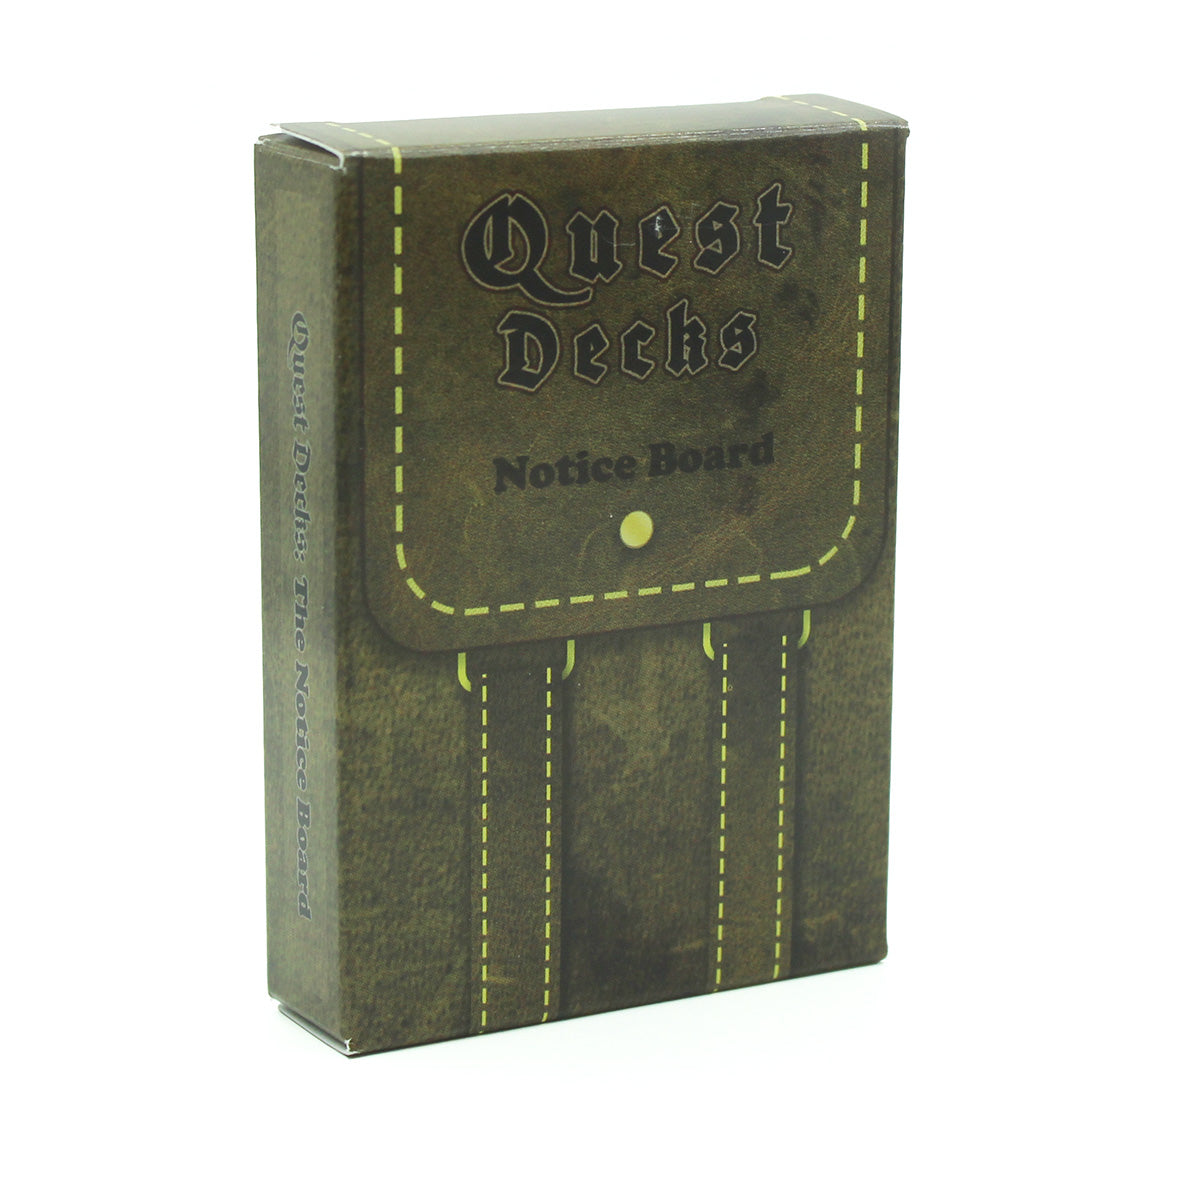 Dice Dungeons Quest Deck - Bards & Cards